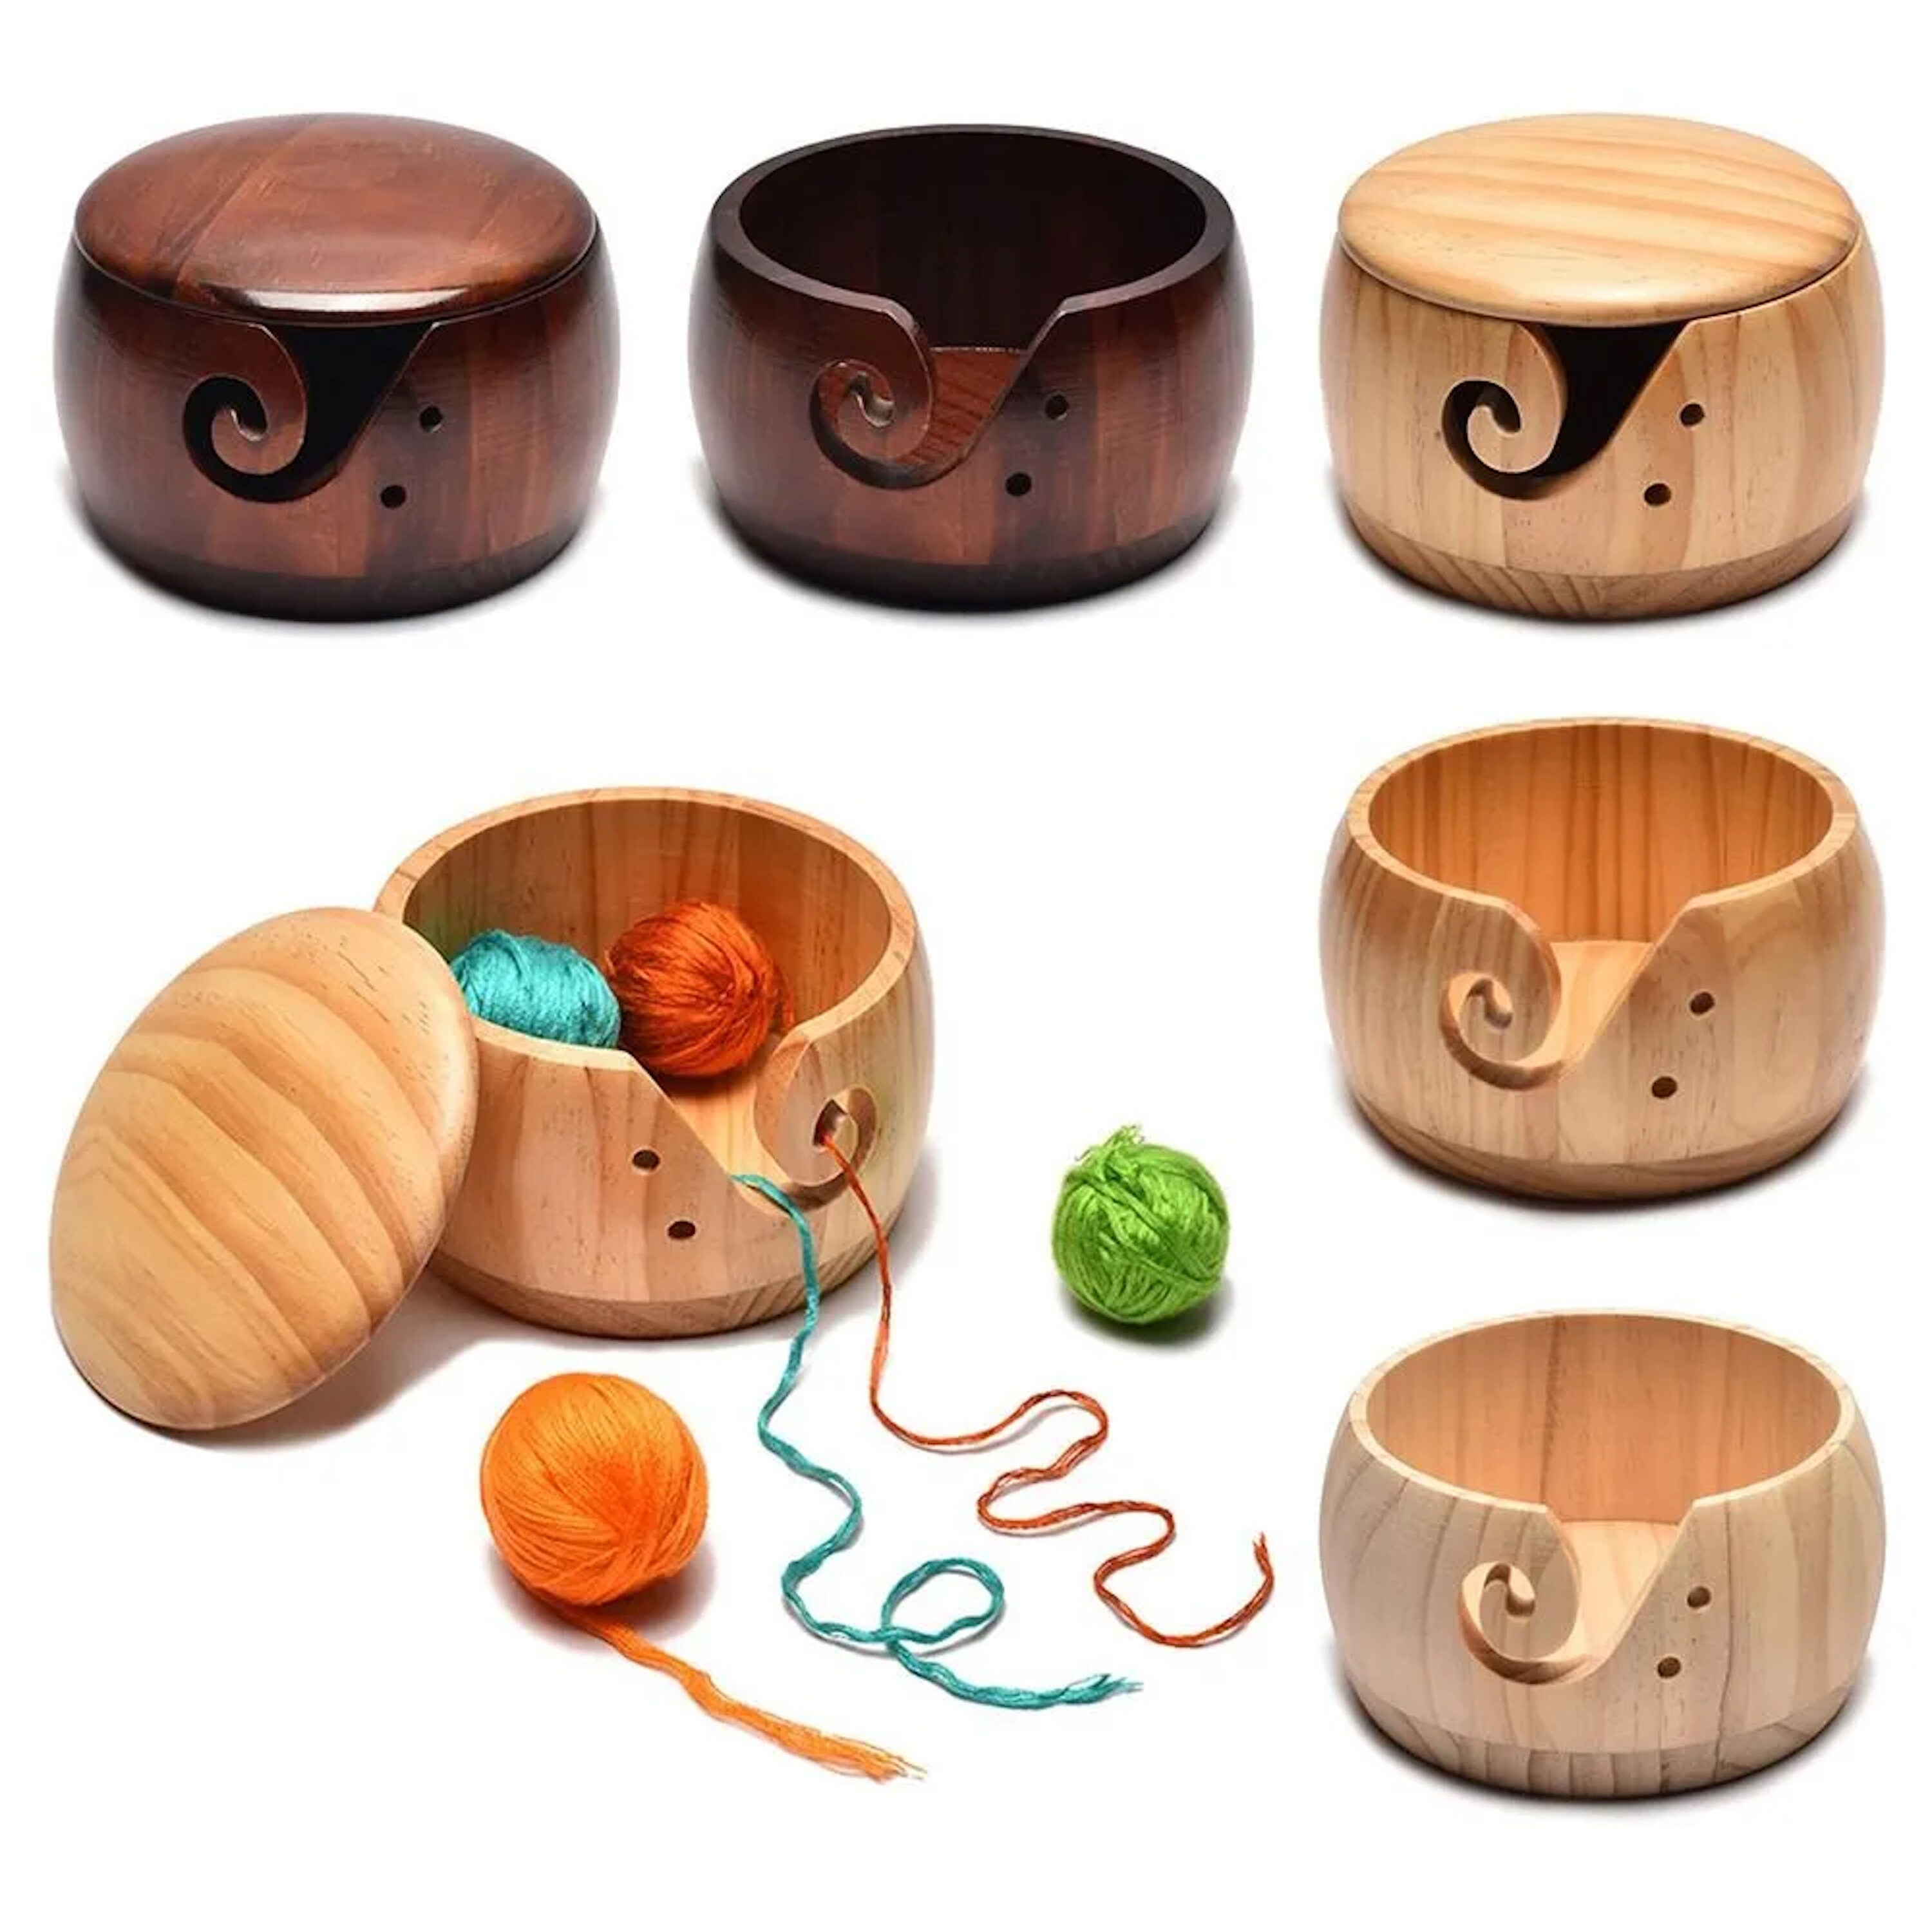 Yarn Bowls For Crocheting Knitting Wooden Yarn Bowl With Holes Perfect Yarn  Holder Bowl For Crocheting And Knitting Accessories - AliExpress